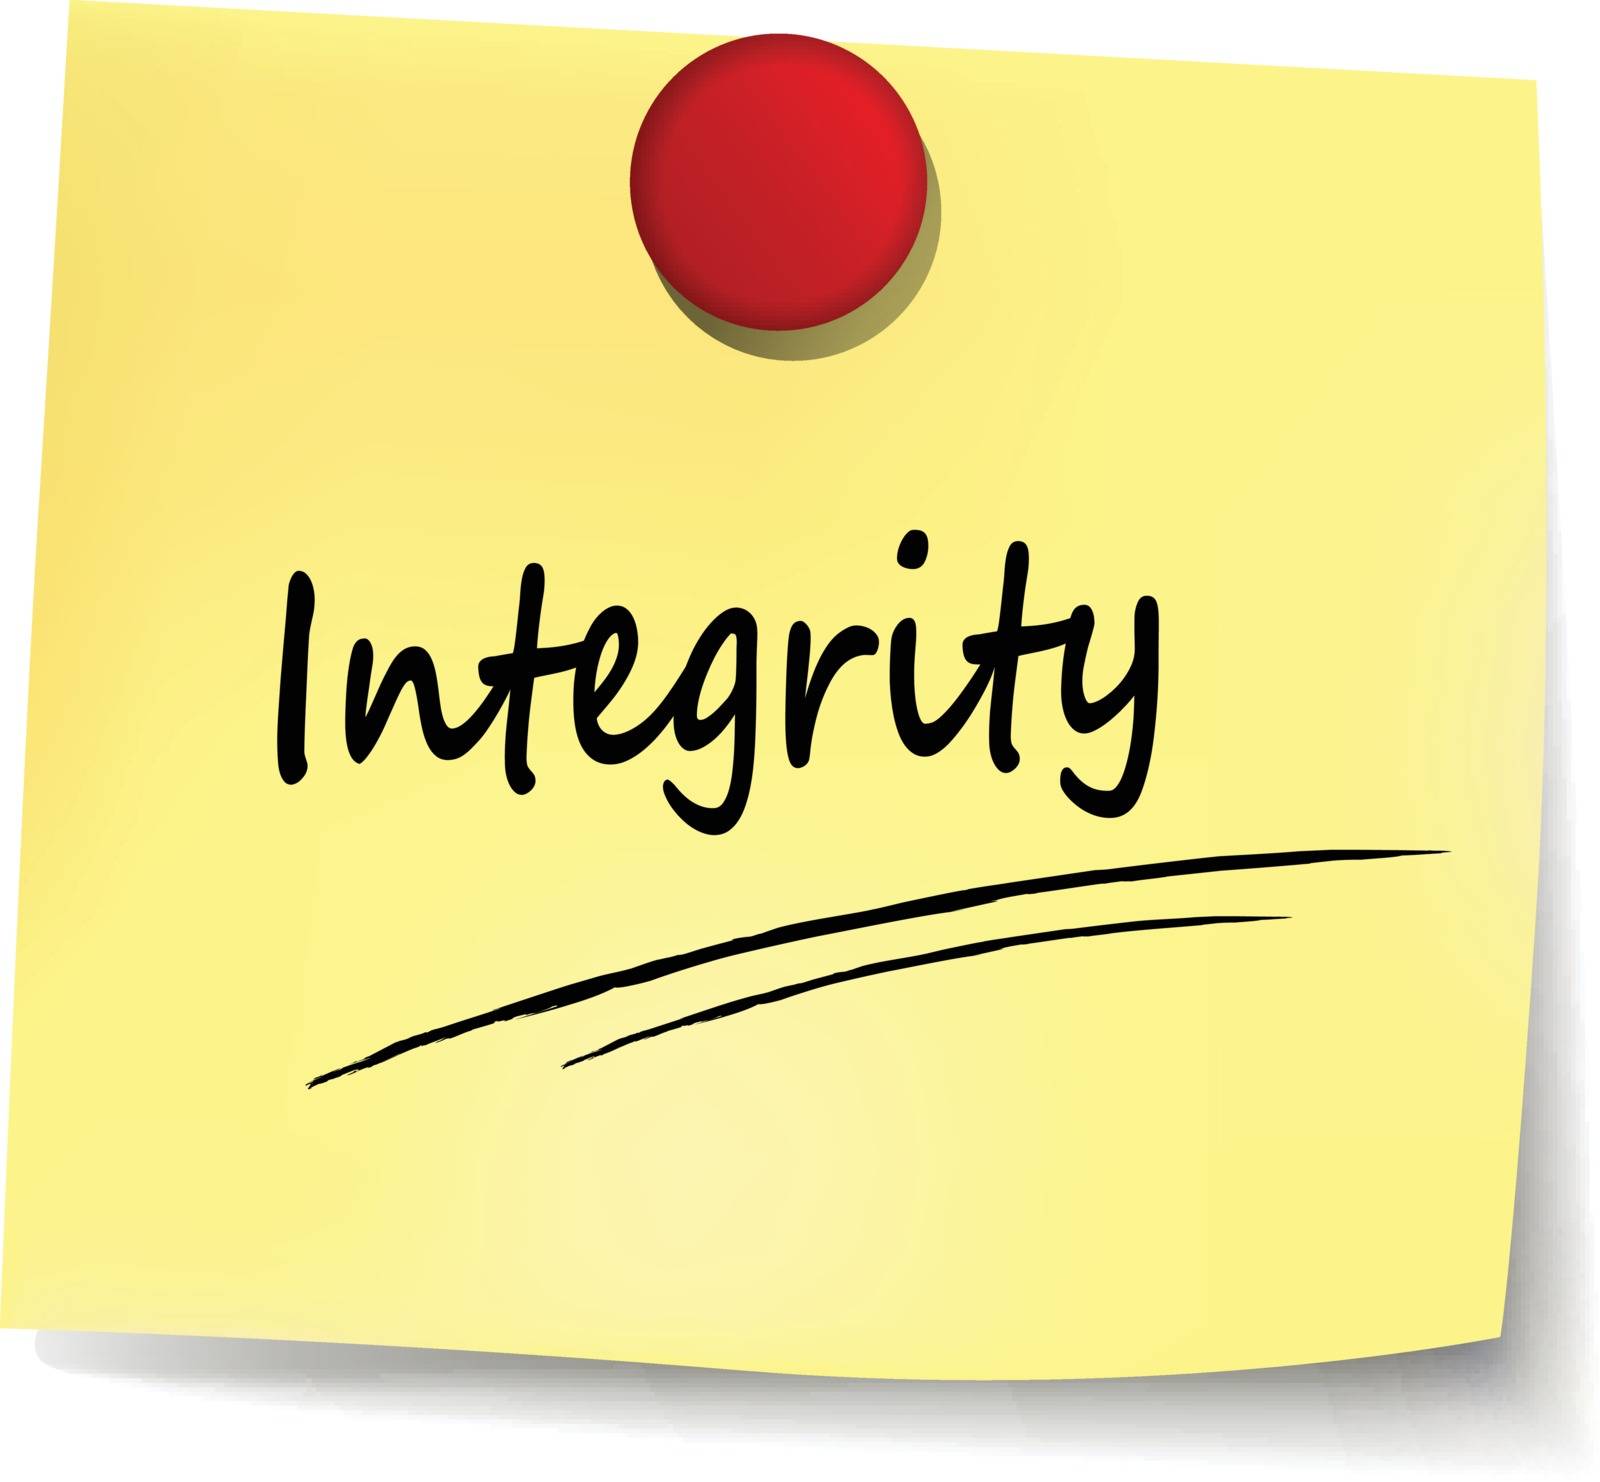 illustration of integrity yellow paper design note